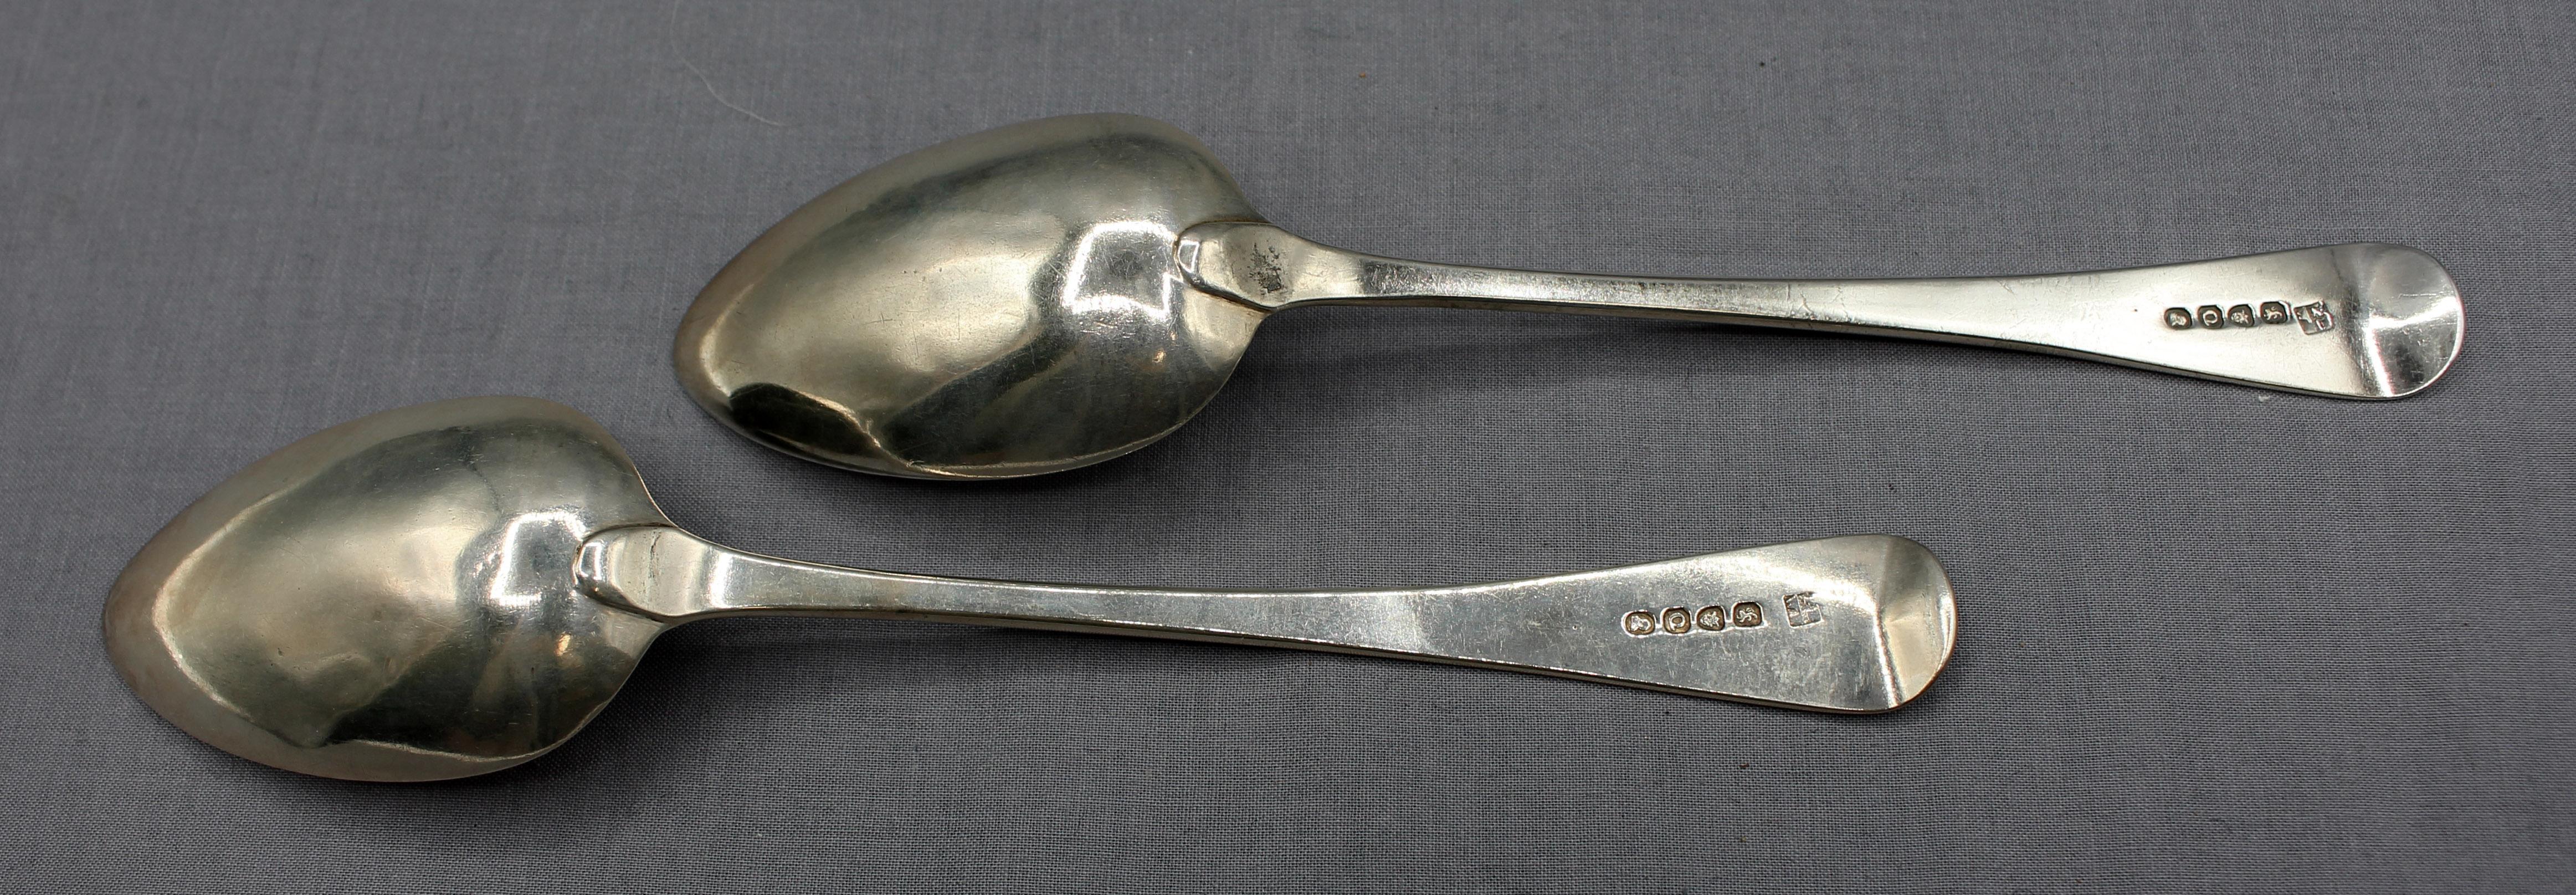 Pair of sterling silver tablespoons by Peter & William Bateman I, London, 1811. 